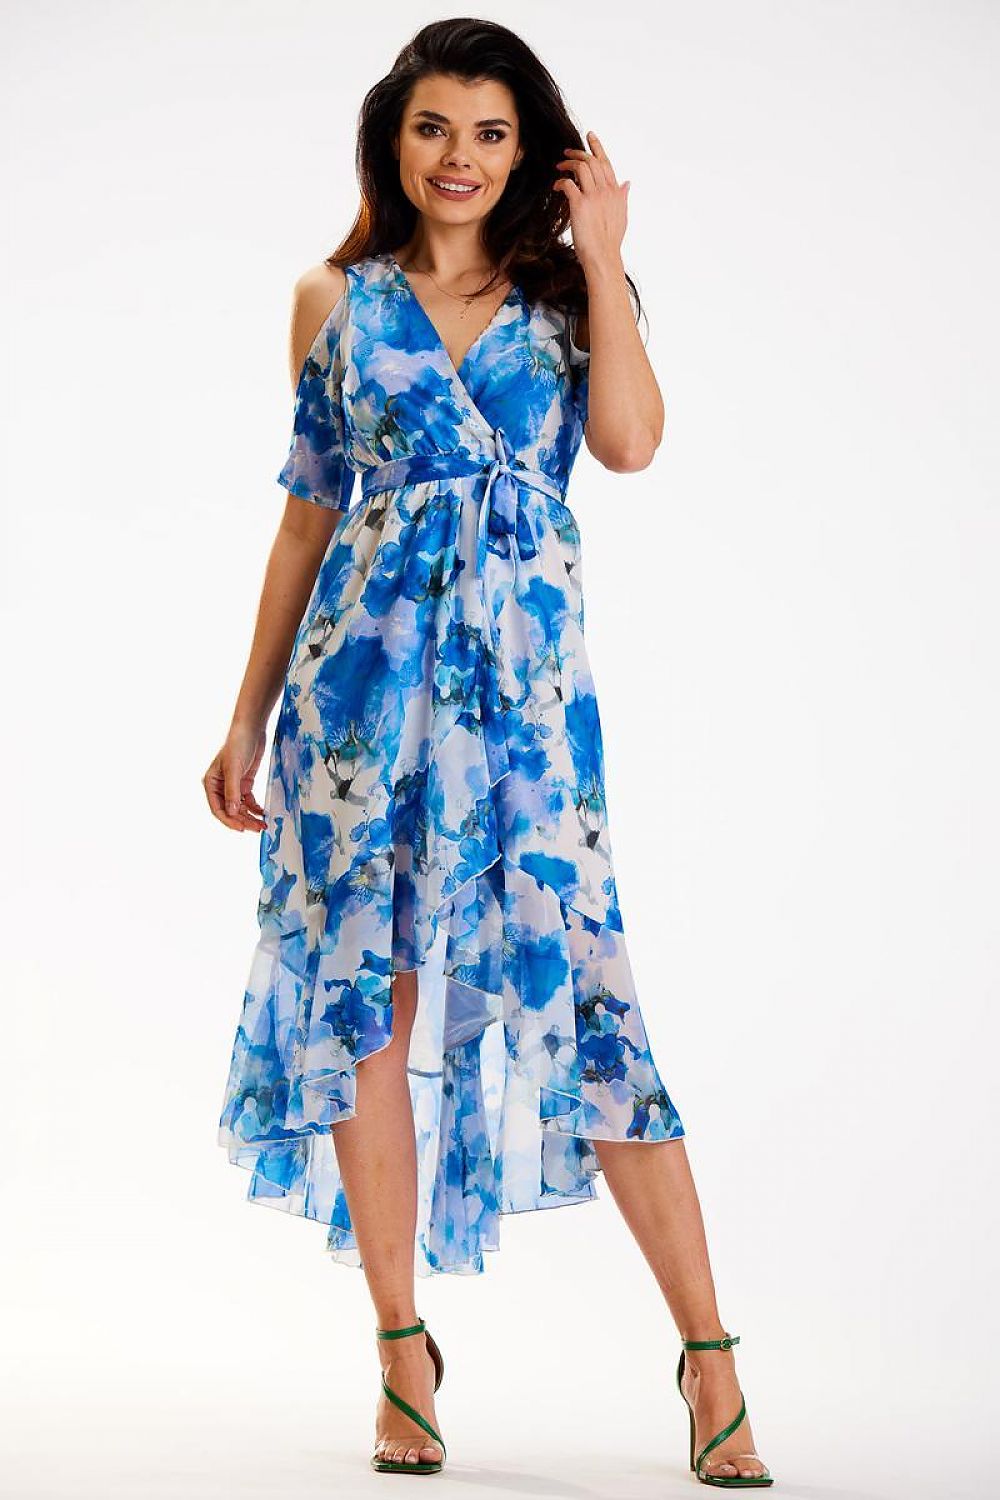 Awama Exposed Shoulder Asymetrical Dress Floral Blue